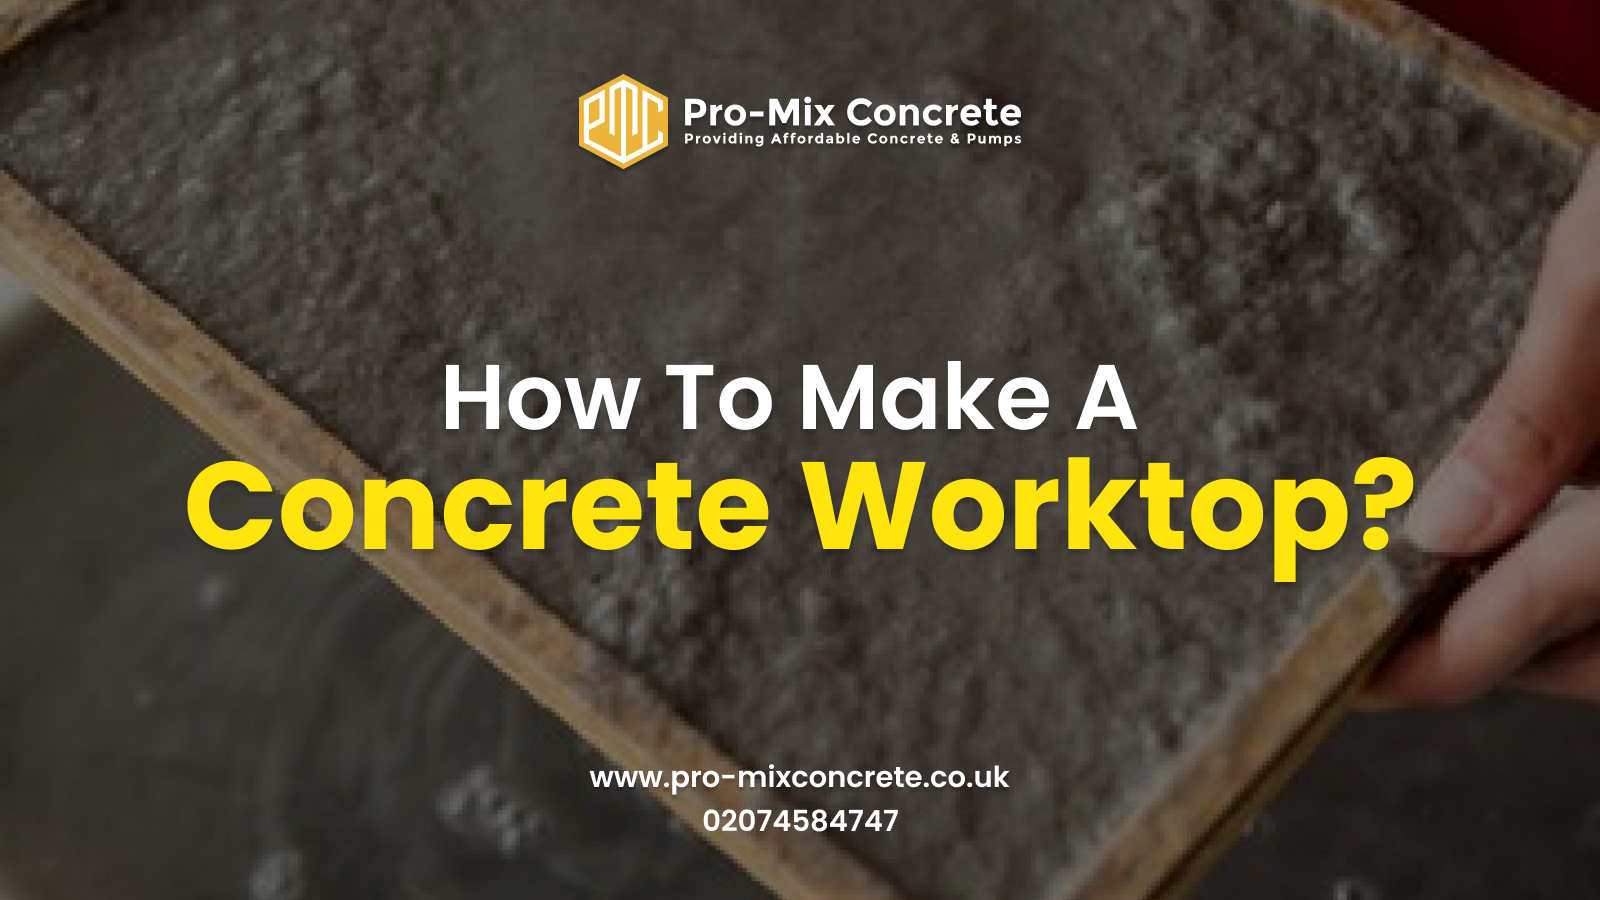 Select How To Make A Concrete Worktop? How To Make A Concrete Worktop